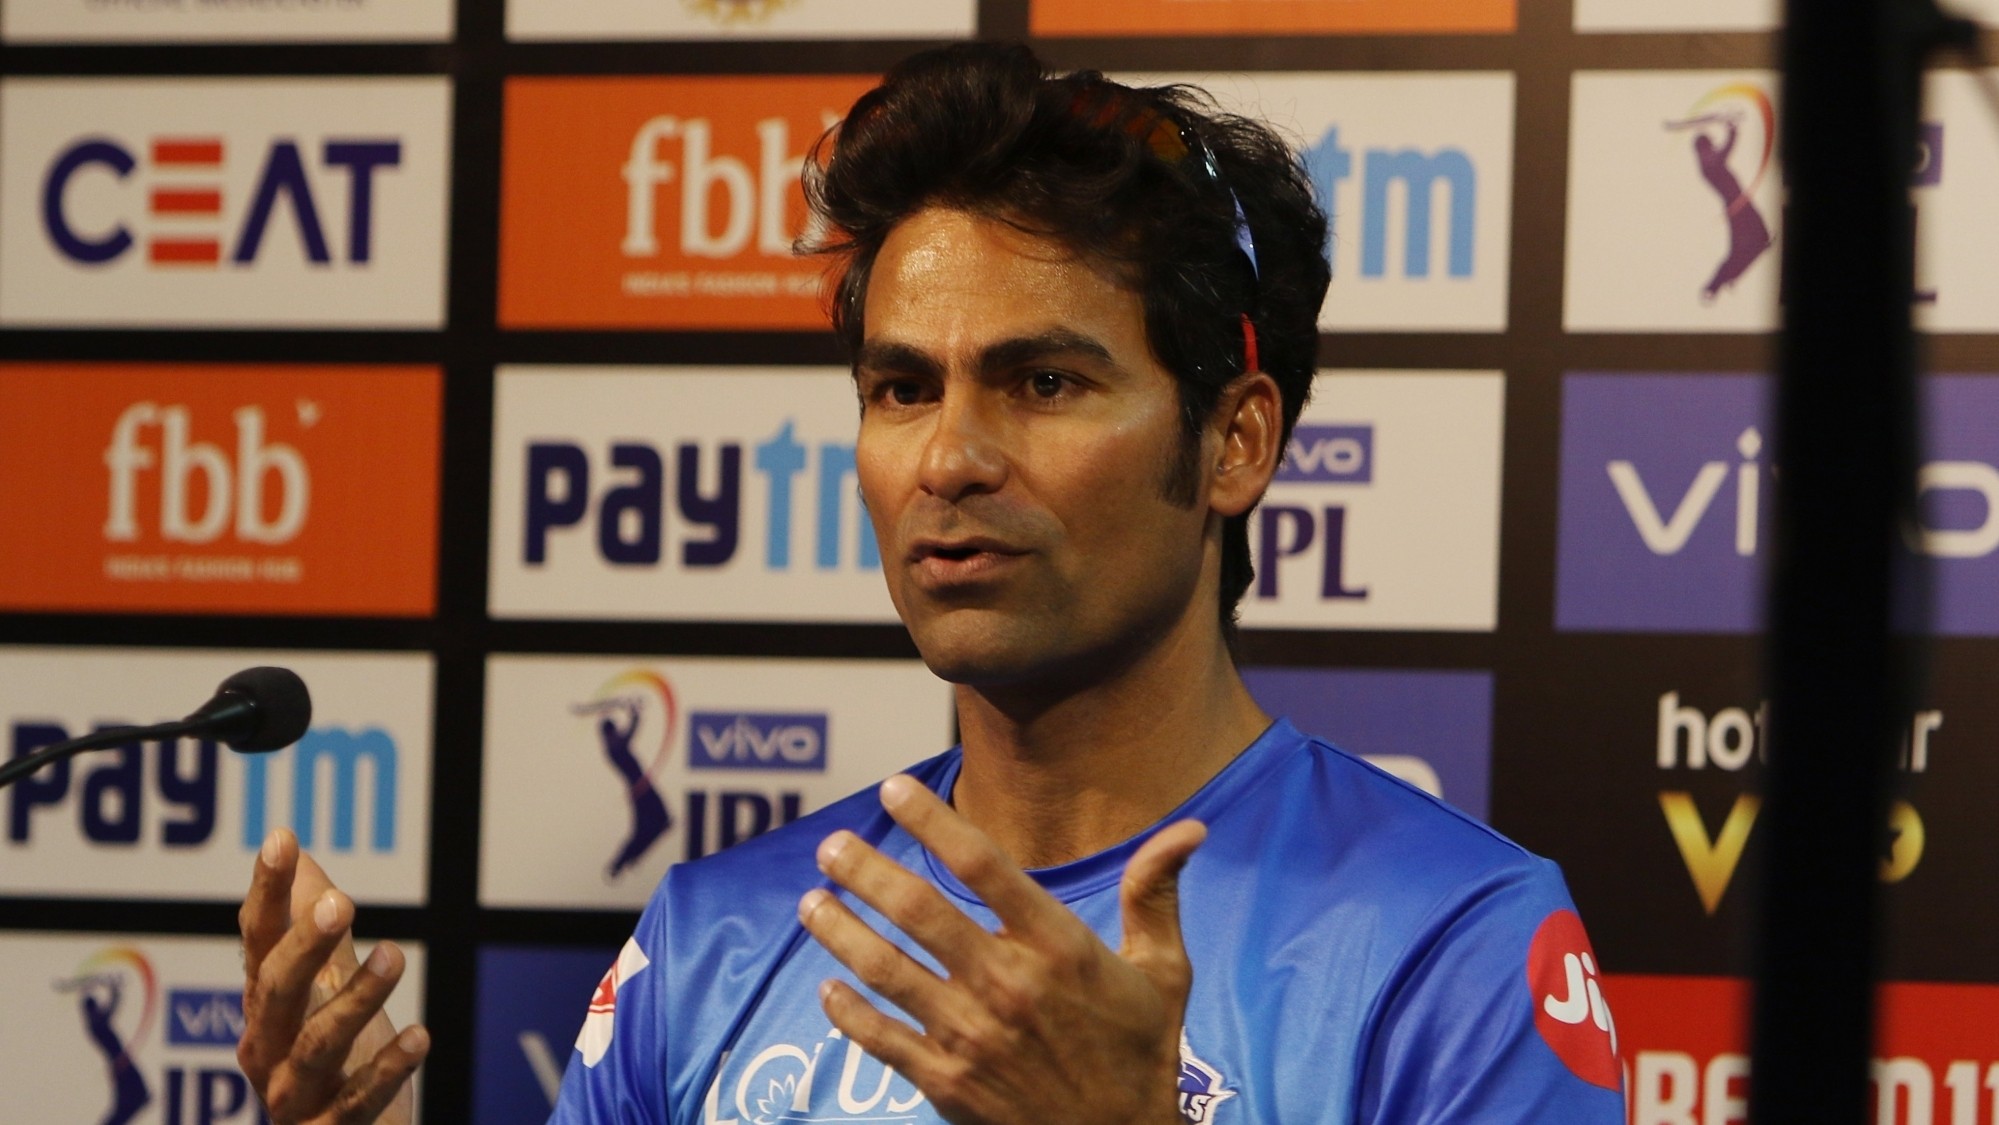 IPL 2019: Mohammad Kaif against this "unfair practice" in the ongoing IPL  season